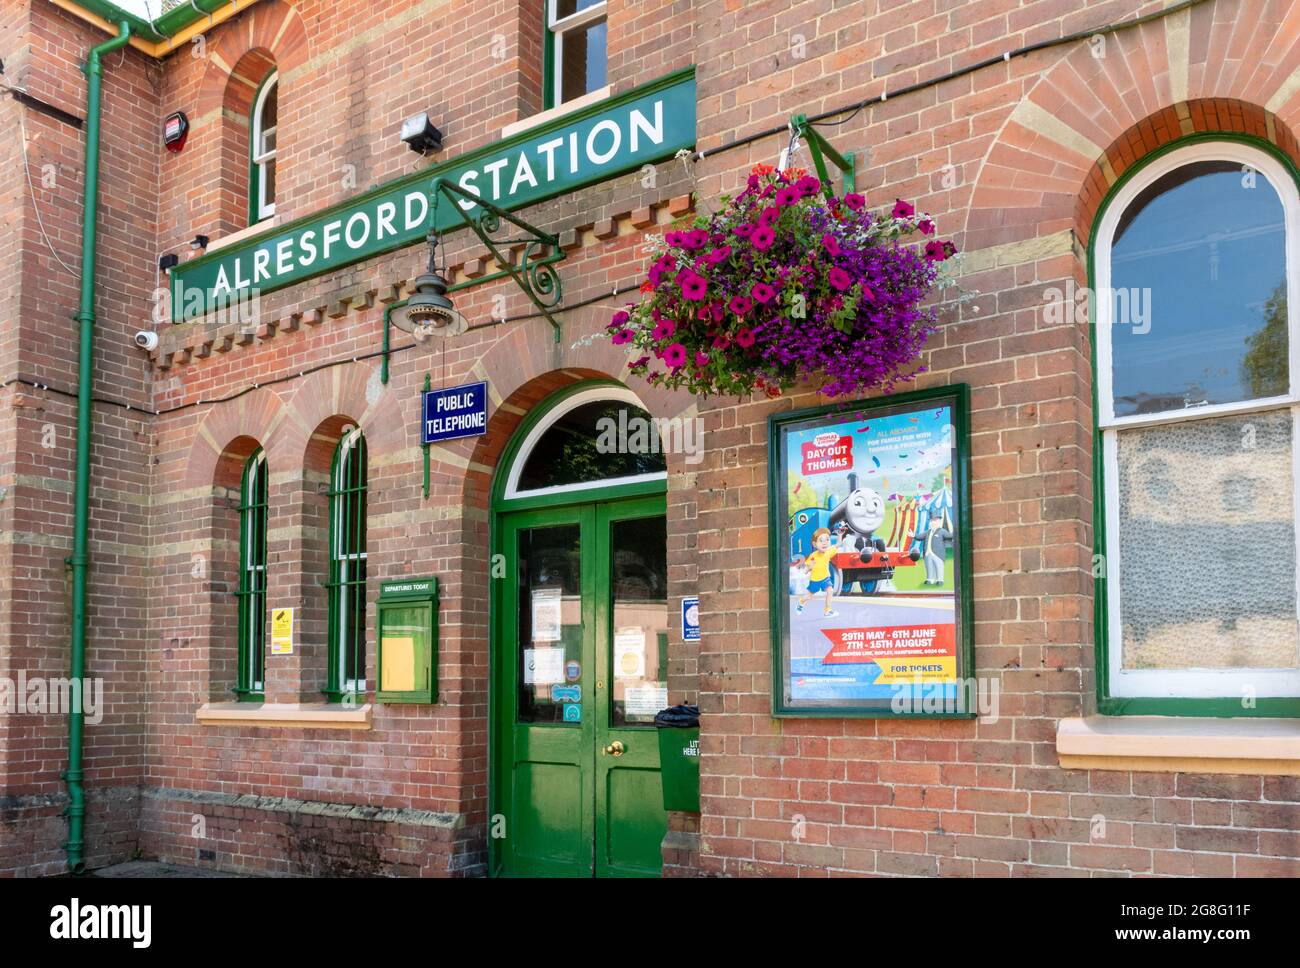 Alresford Station for the Watercress Line steam railway, visitor attraction in Hampshire, England, UK. Stock Photo